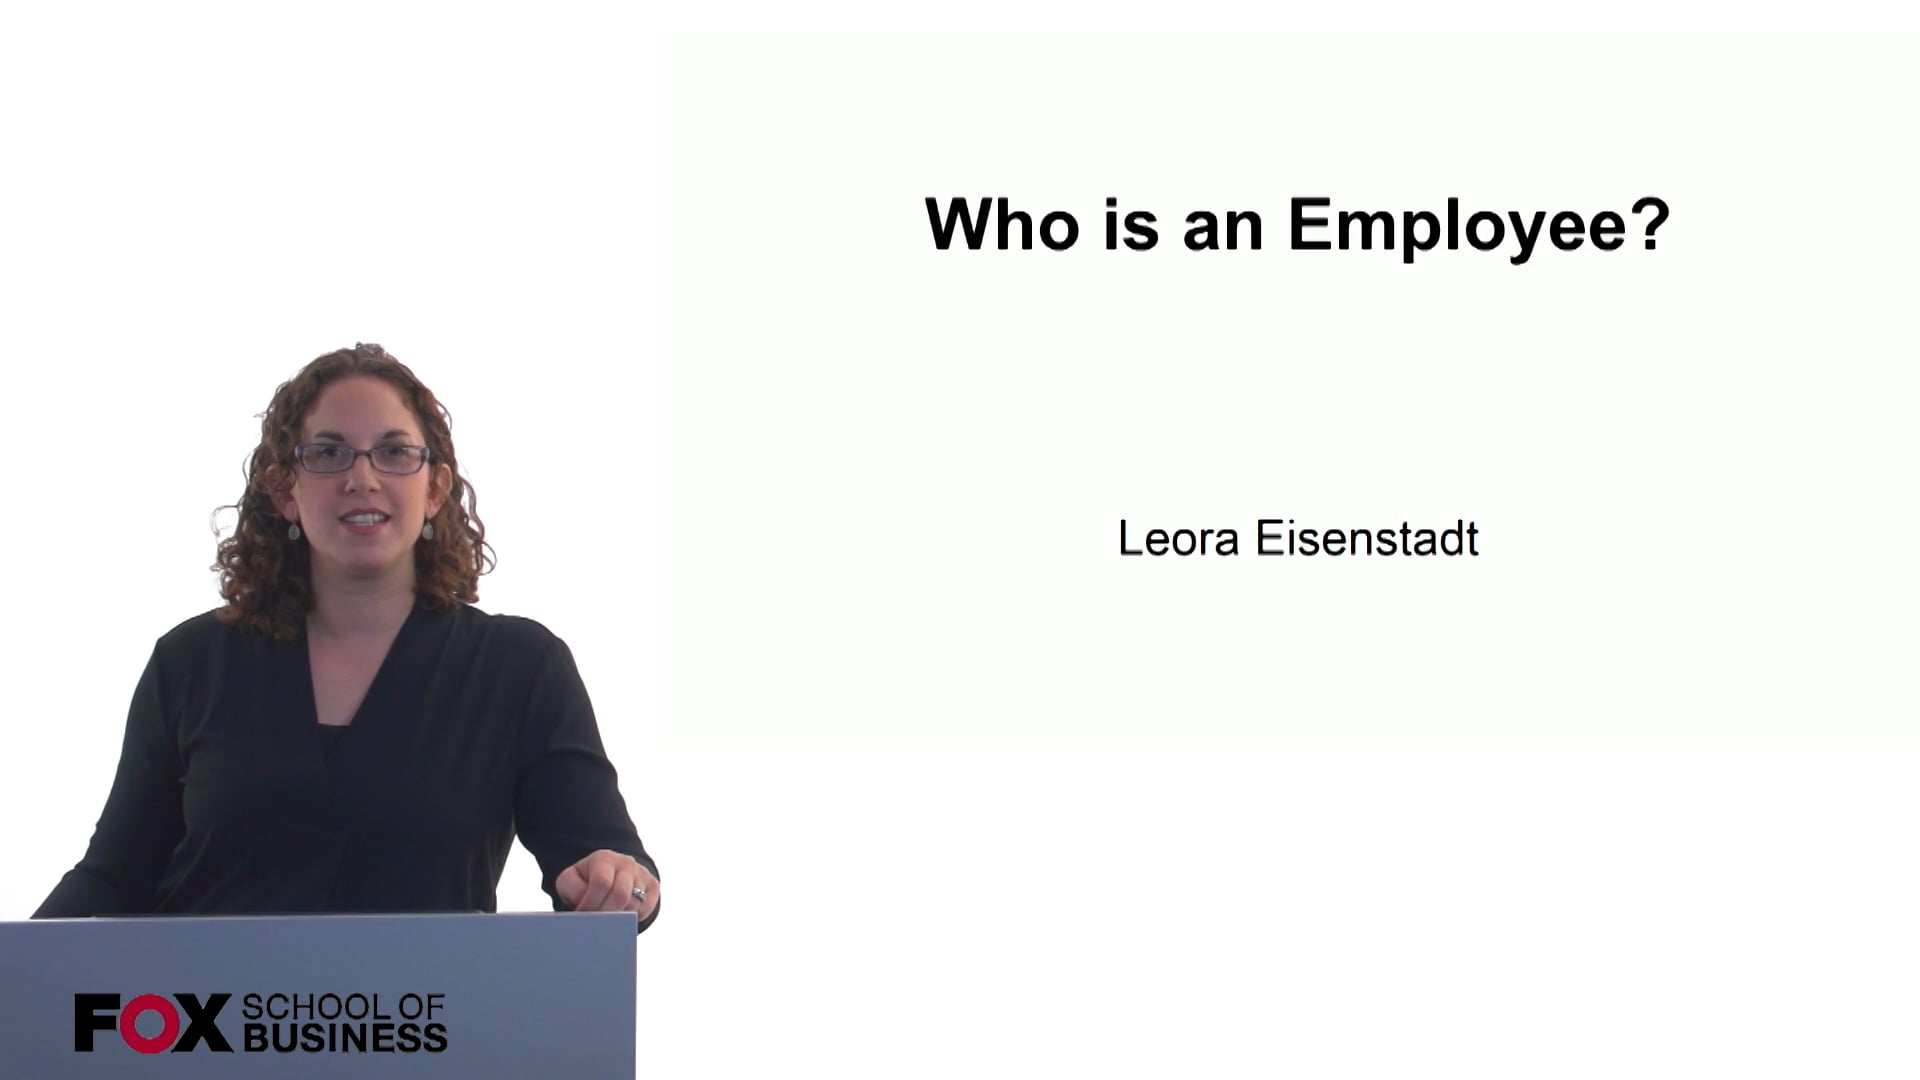 Who is an Employee?